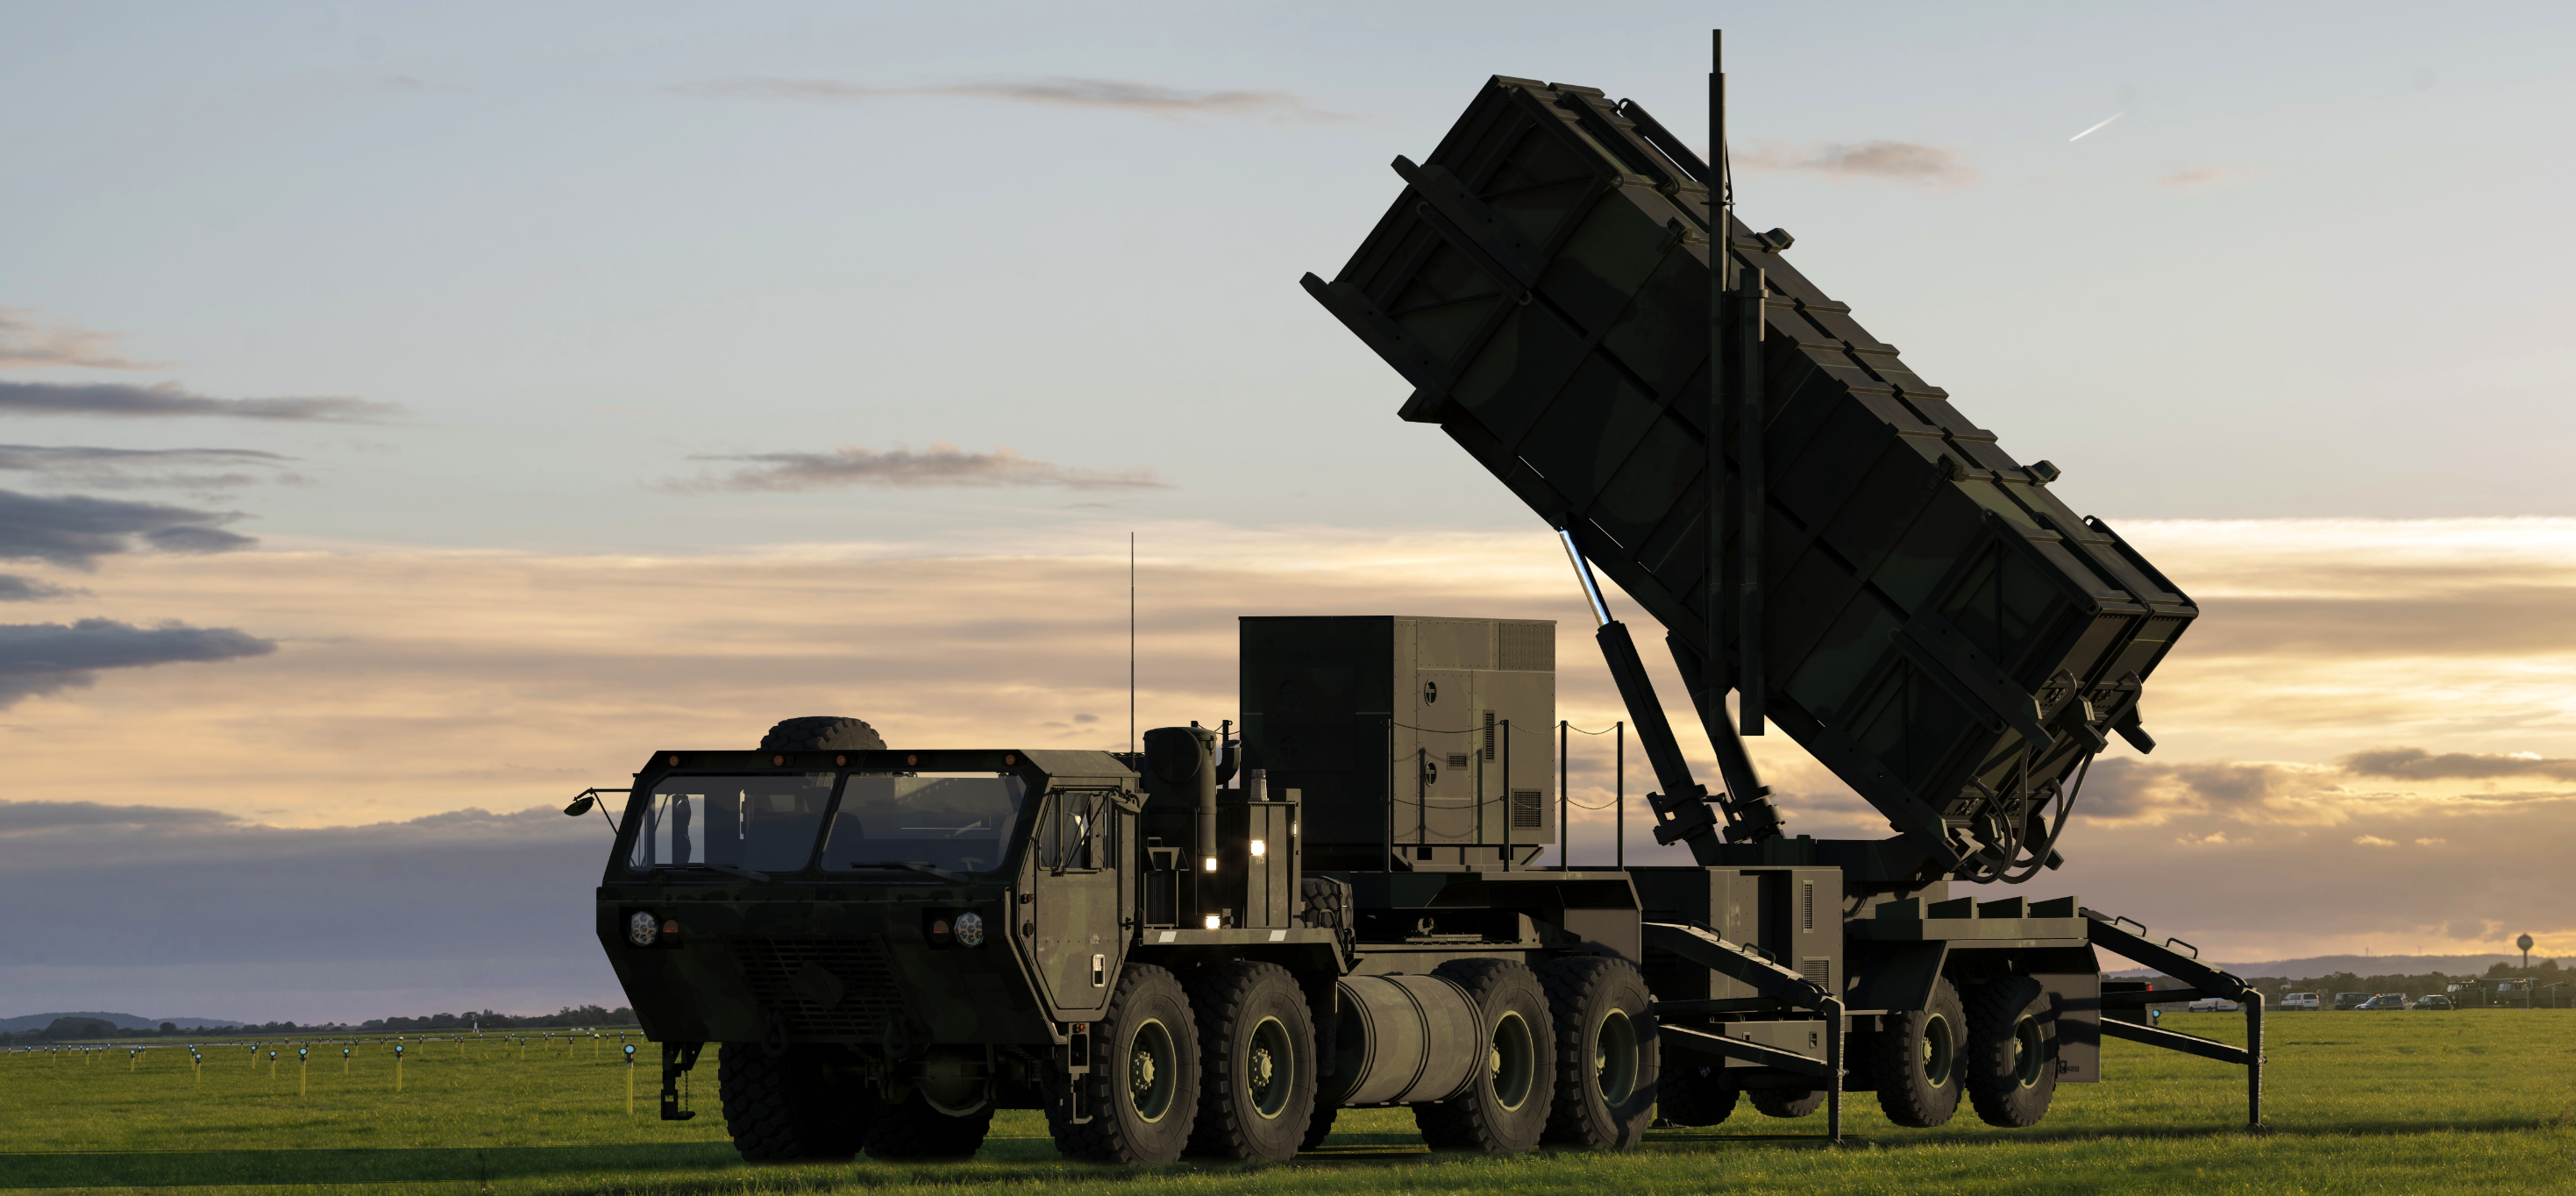 UWC calls upon Ukraine’s allies to immediately provide additional air and missile defense systems